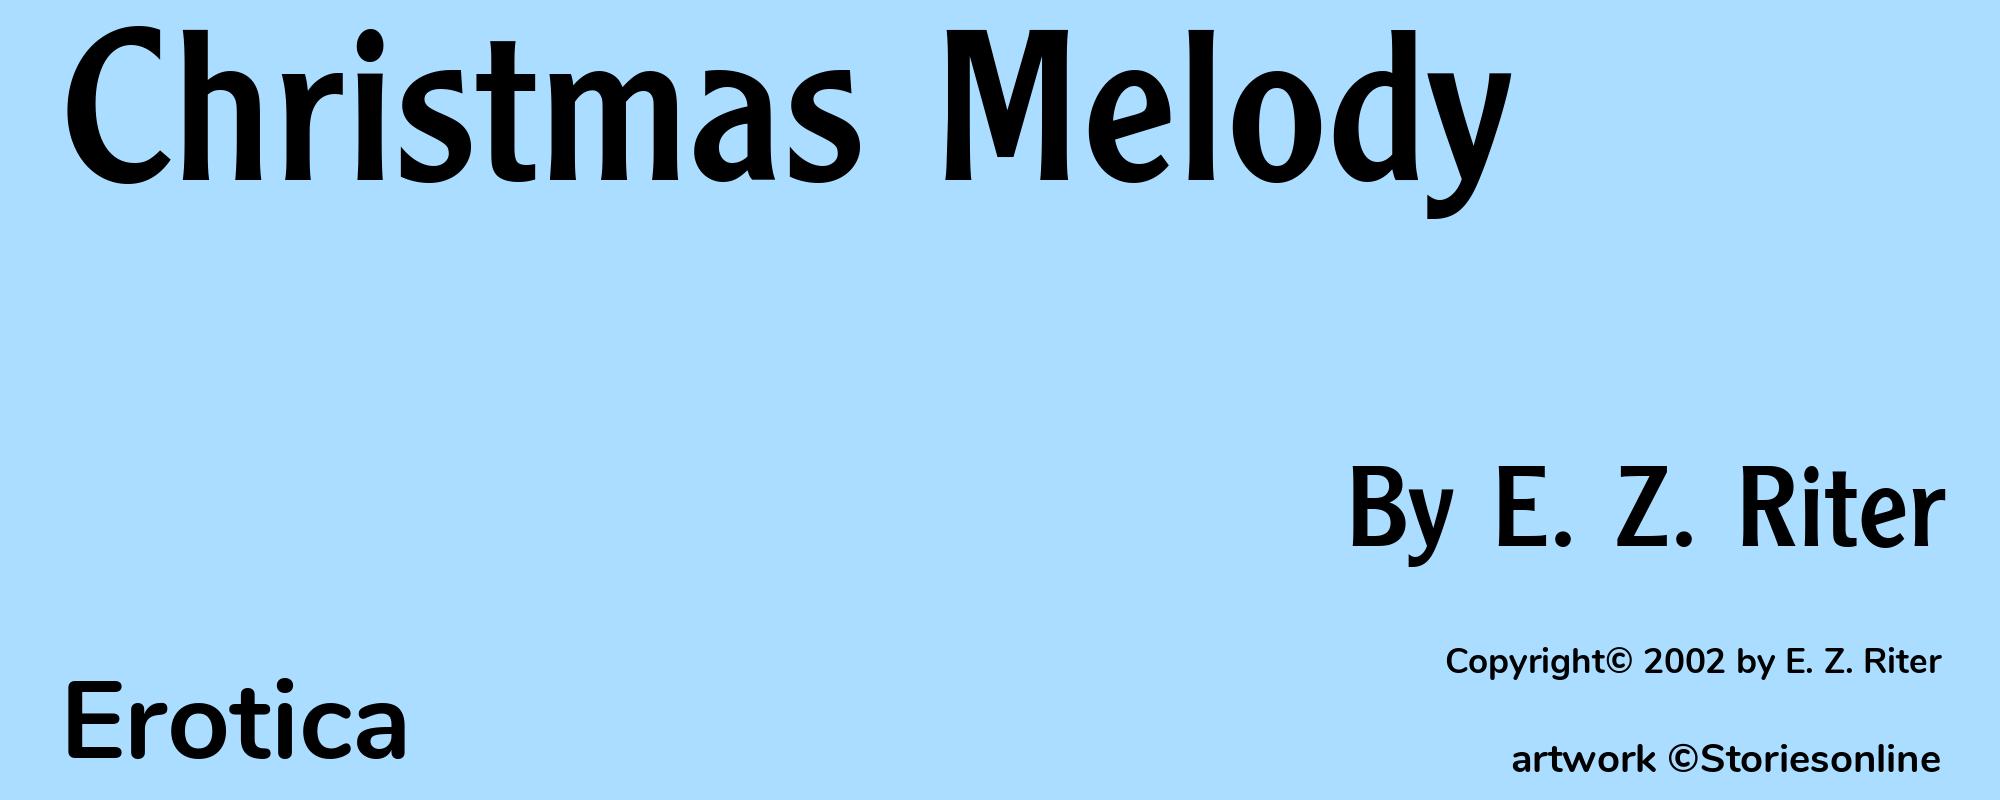 Christmas Melody - Cover